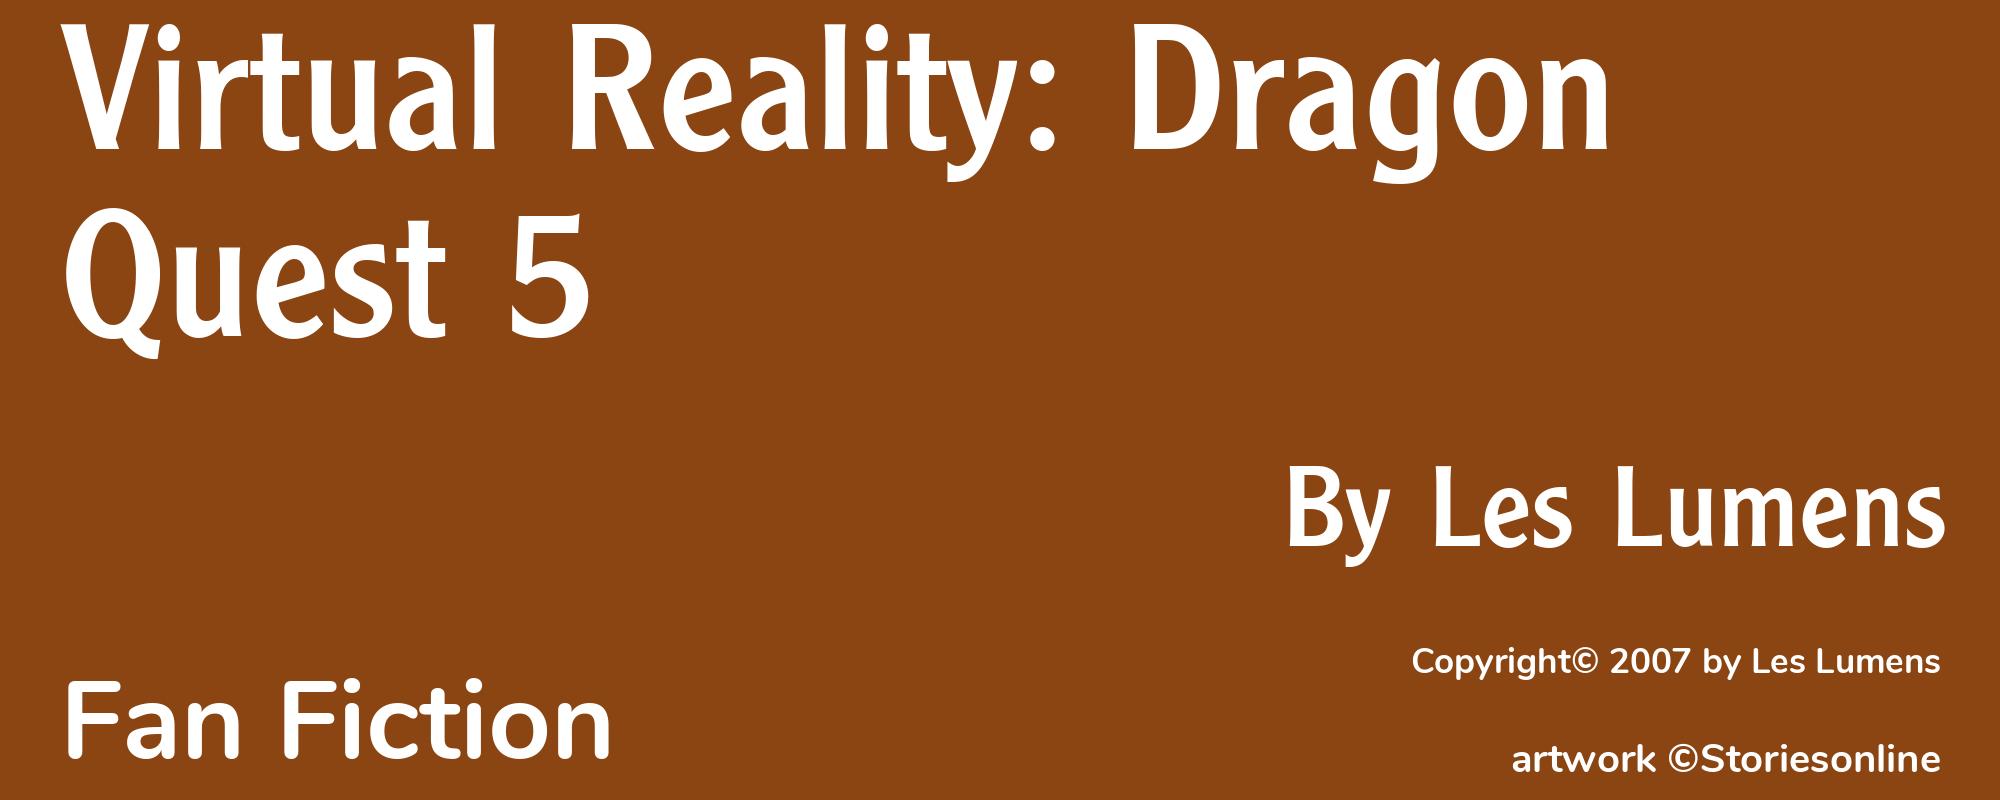 Virtual Reality: Dragon Quest 5 - Cover